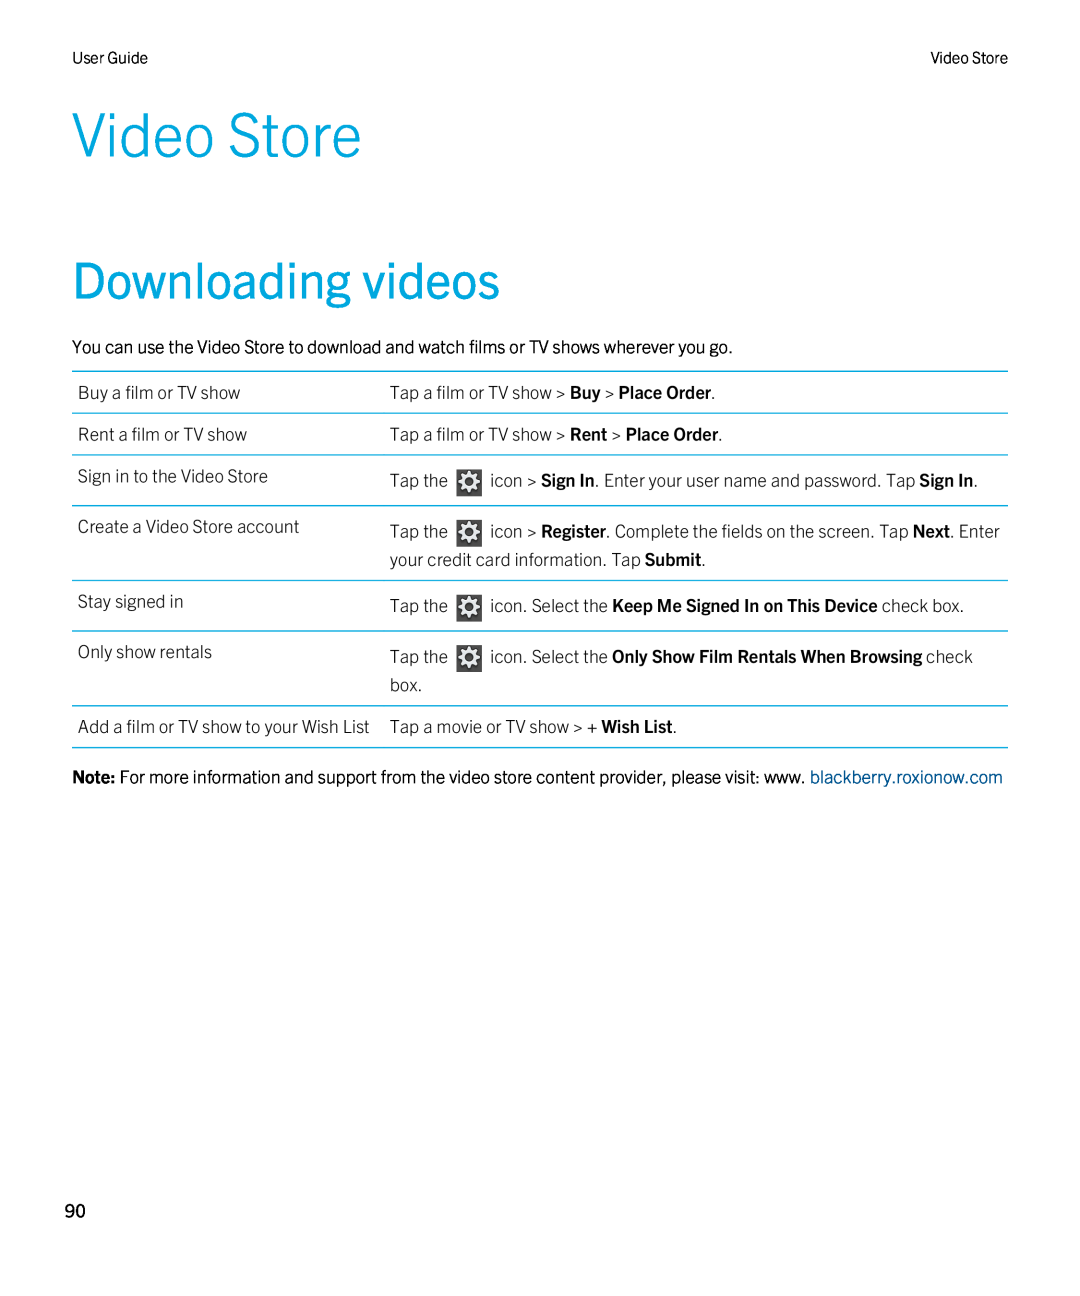 Blackberry 2.0.1 manual Video Store, Downloading videos, icon. Select the Keep Me Signed In on This Device check box 